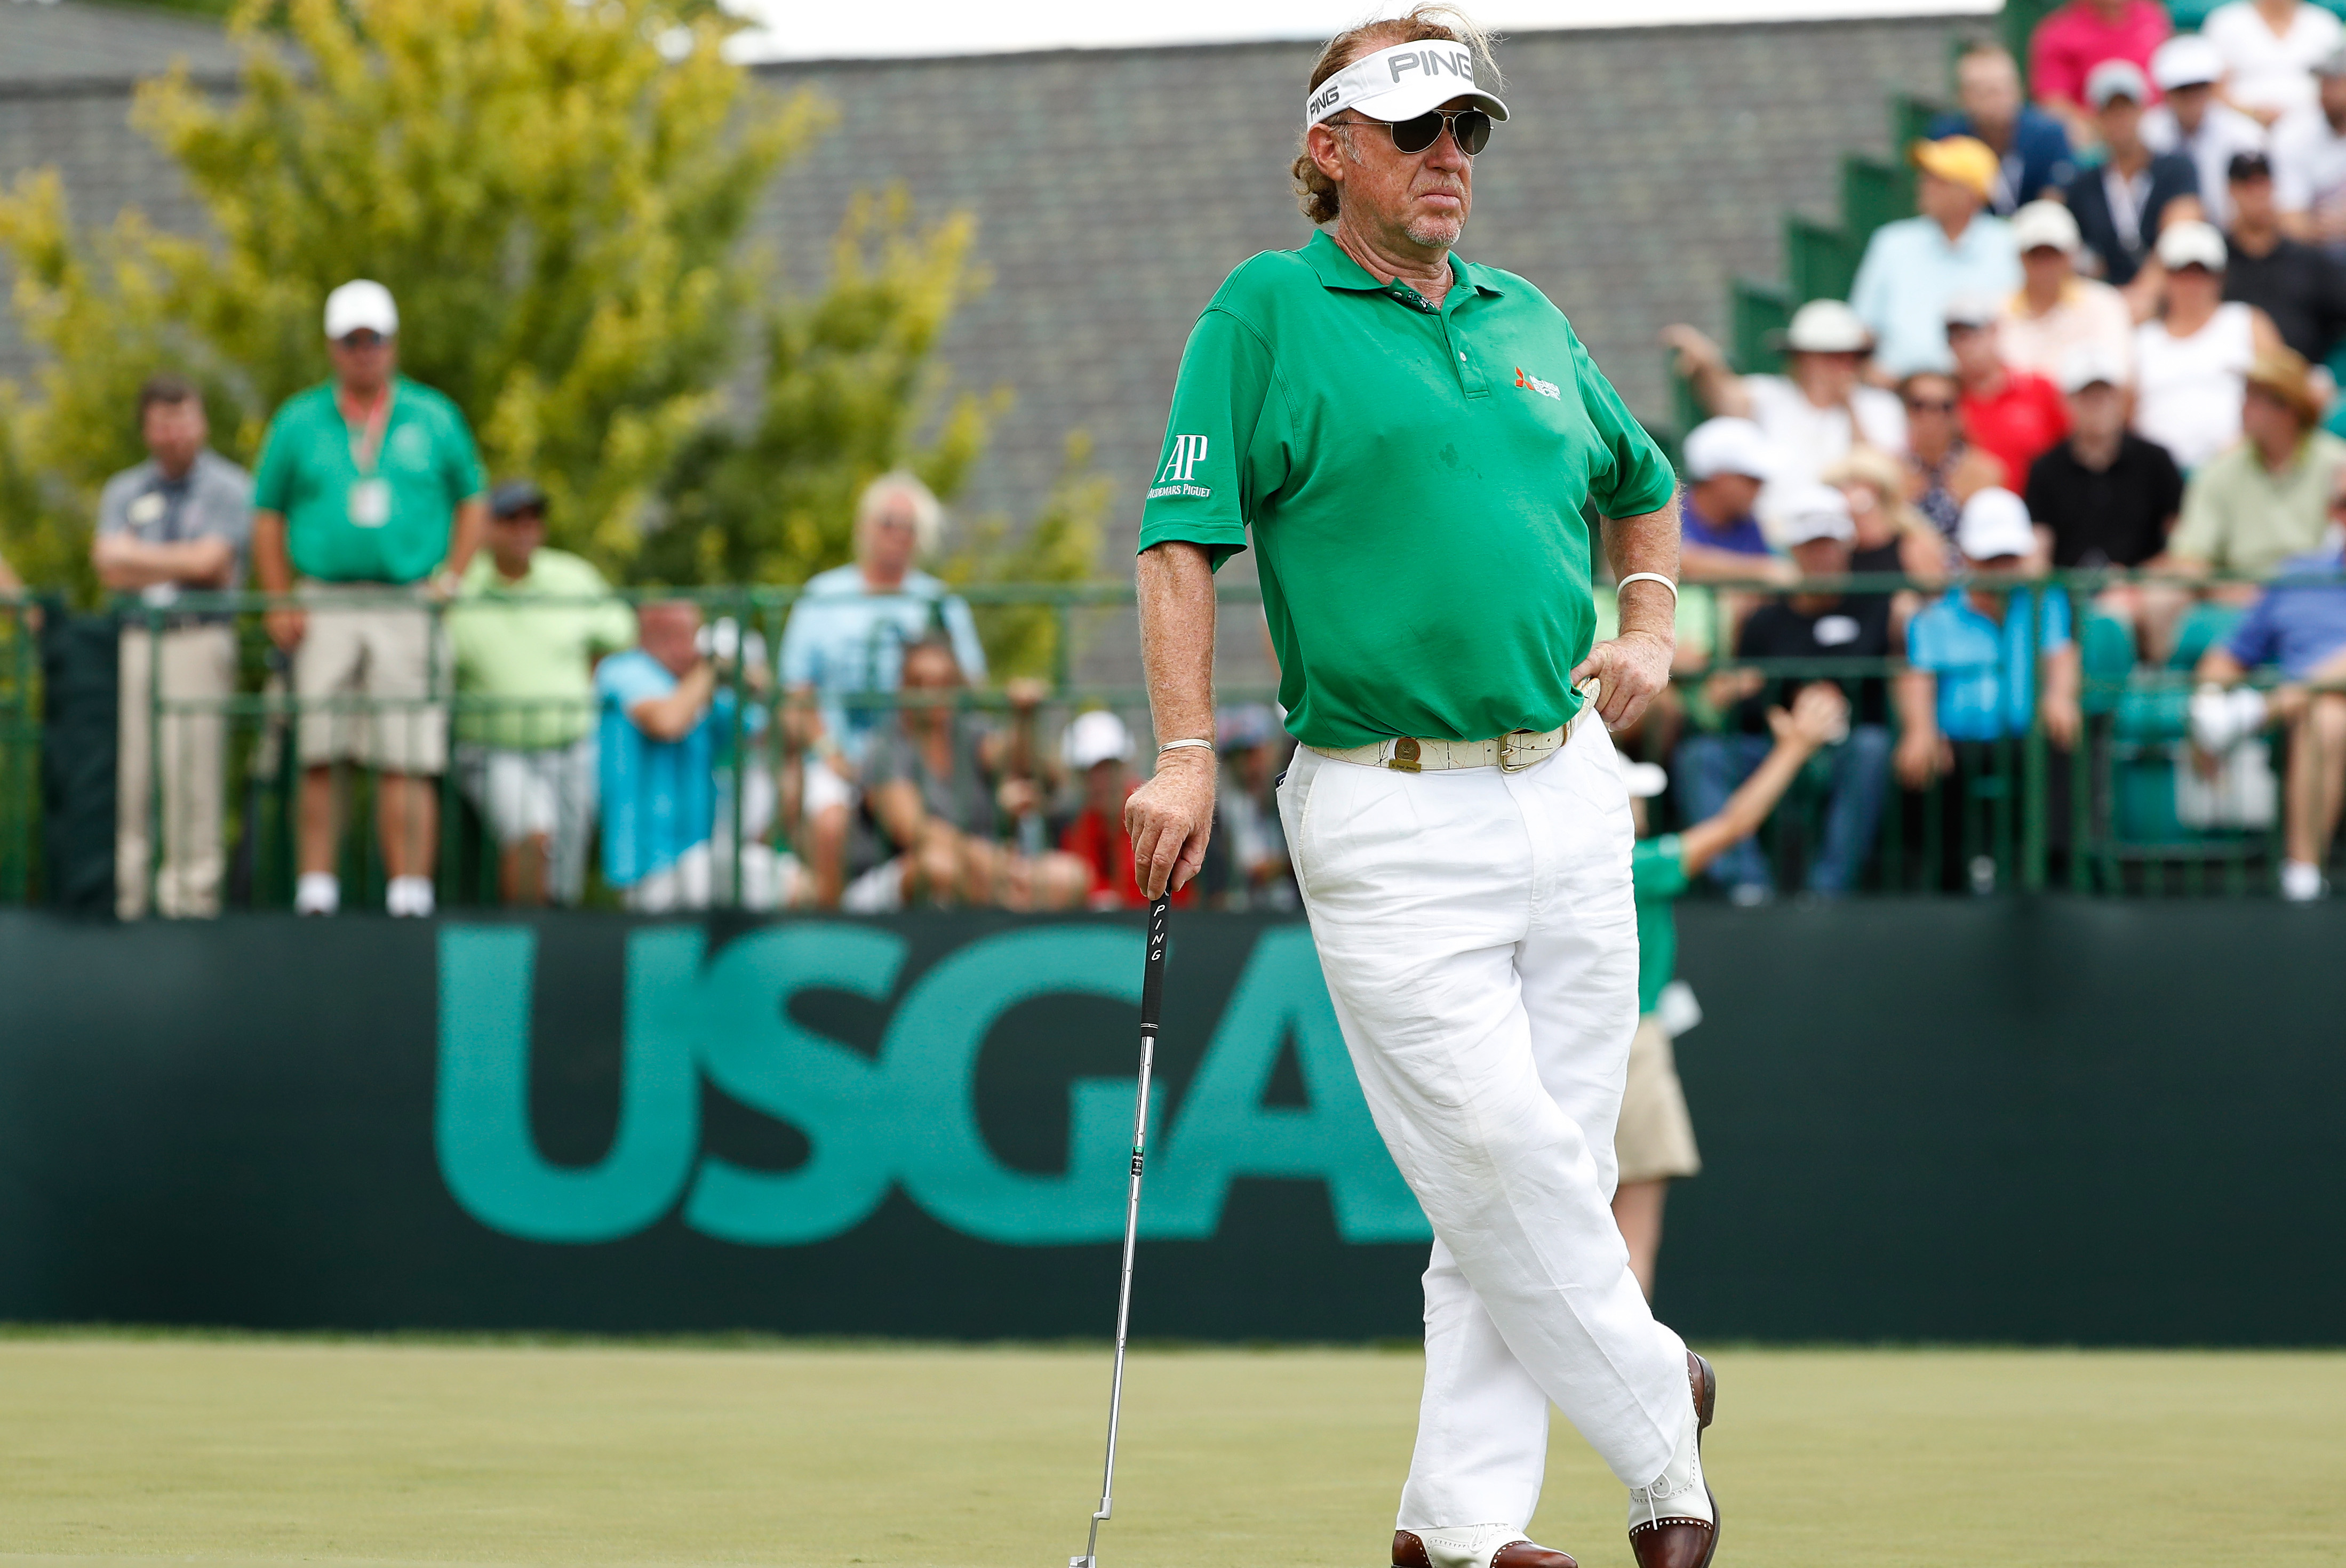 US Senior Open of Golf 2016 Saturday Leaderboard Scores and Highlights